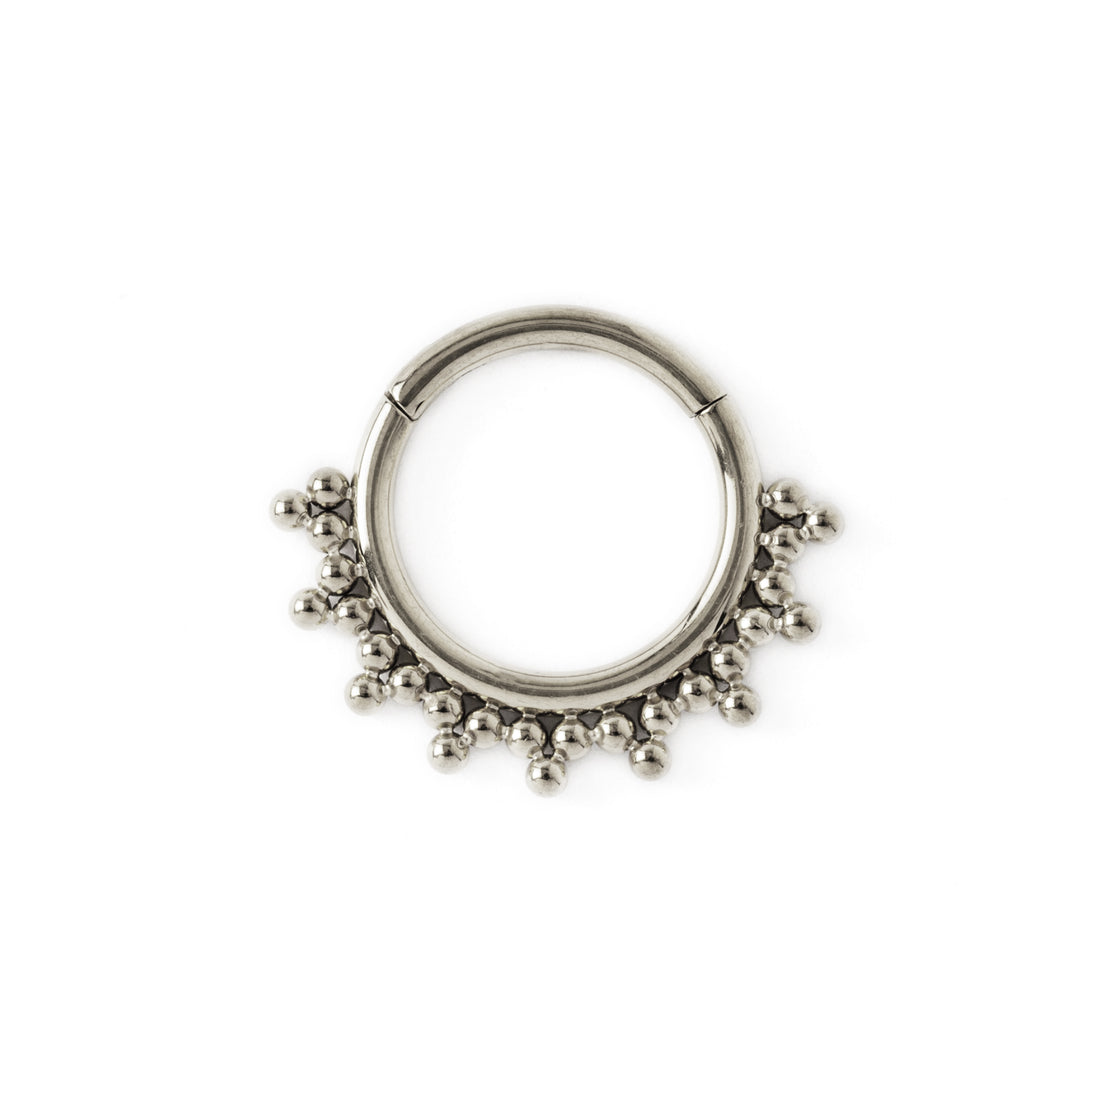 Sarika surgical steel septum clicker frontal view